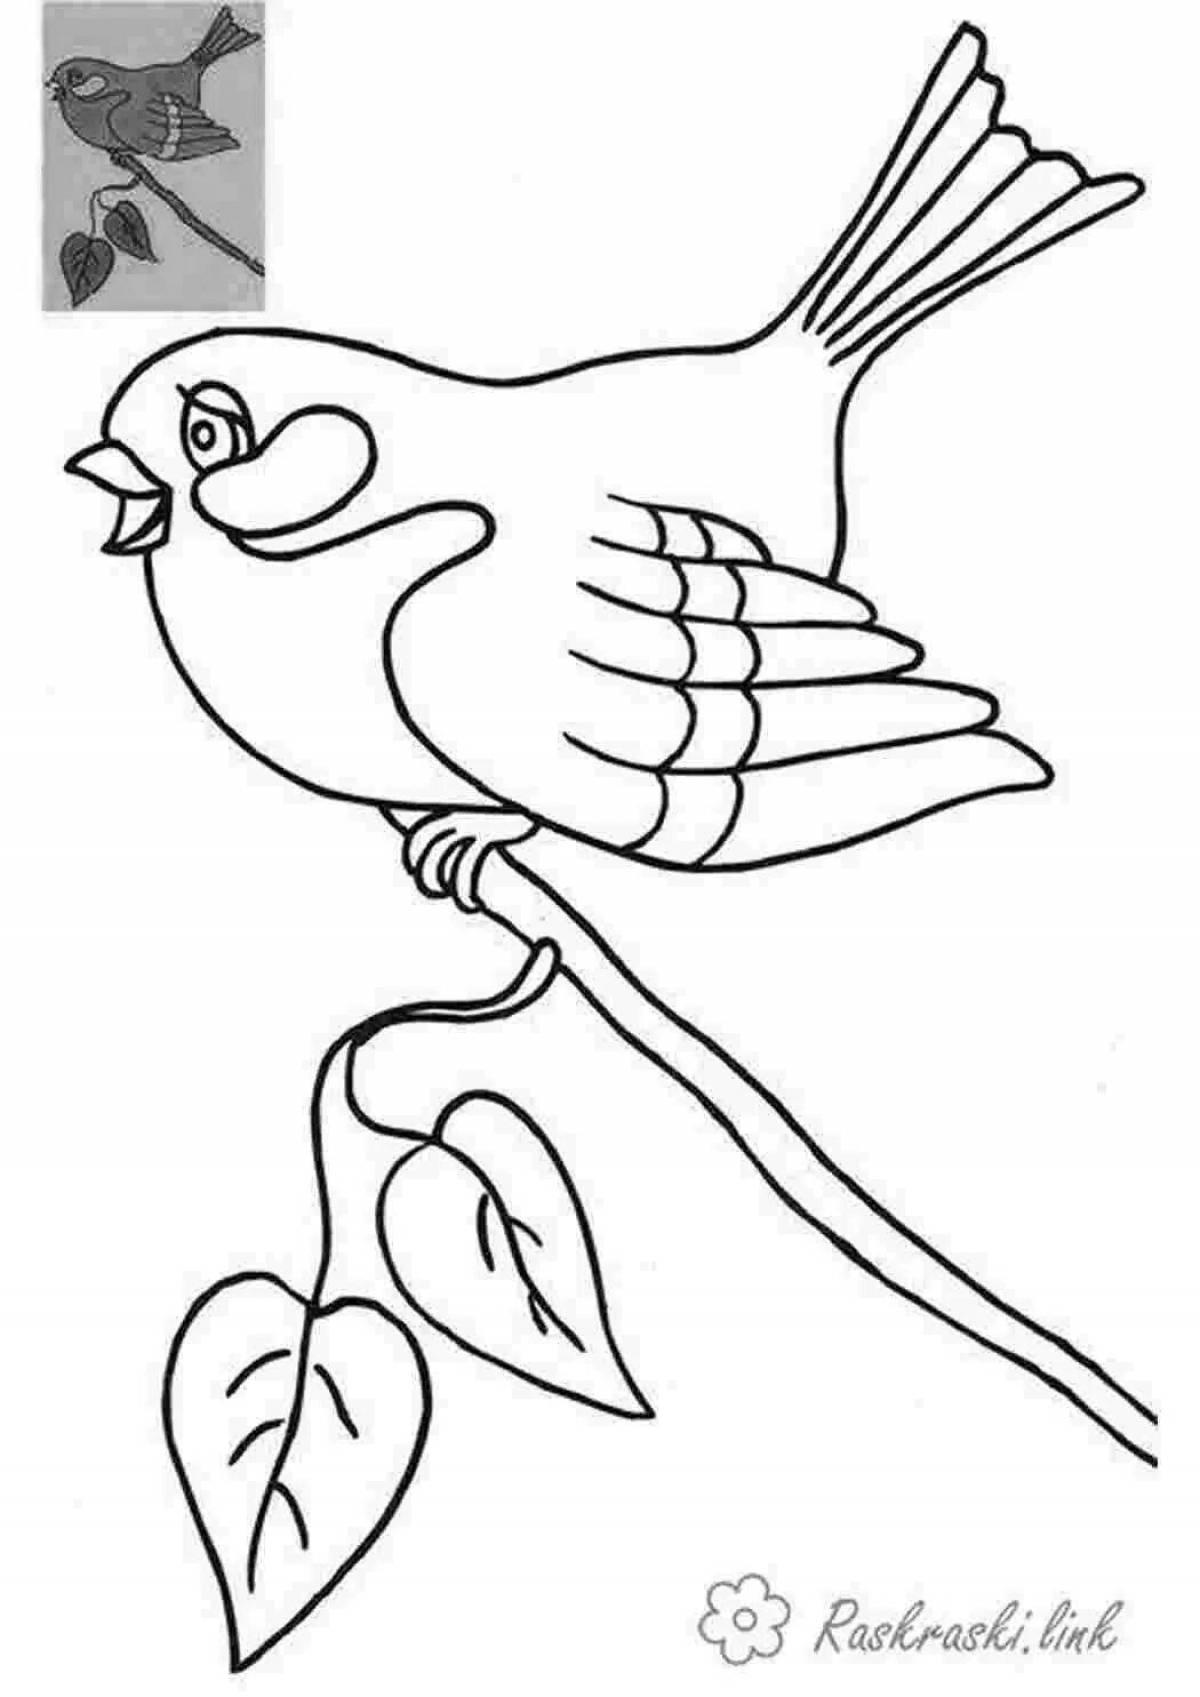 Amazing bird coloring page for 5-6 year olds